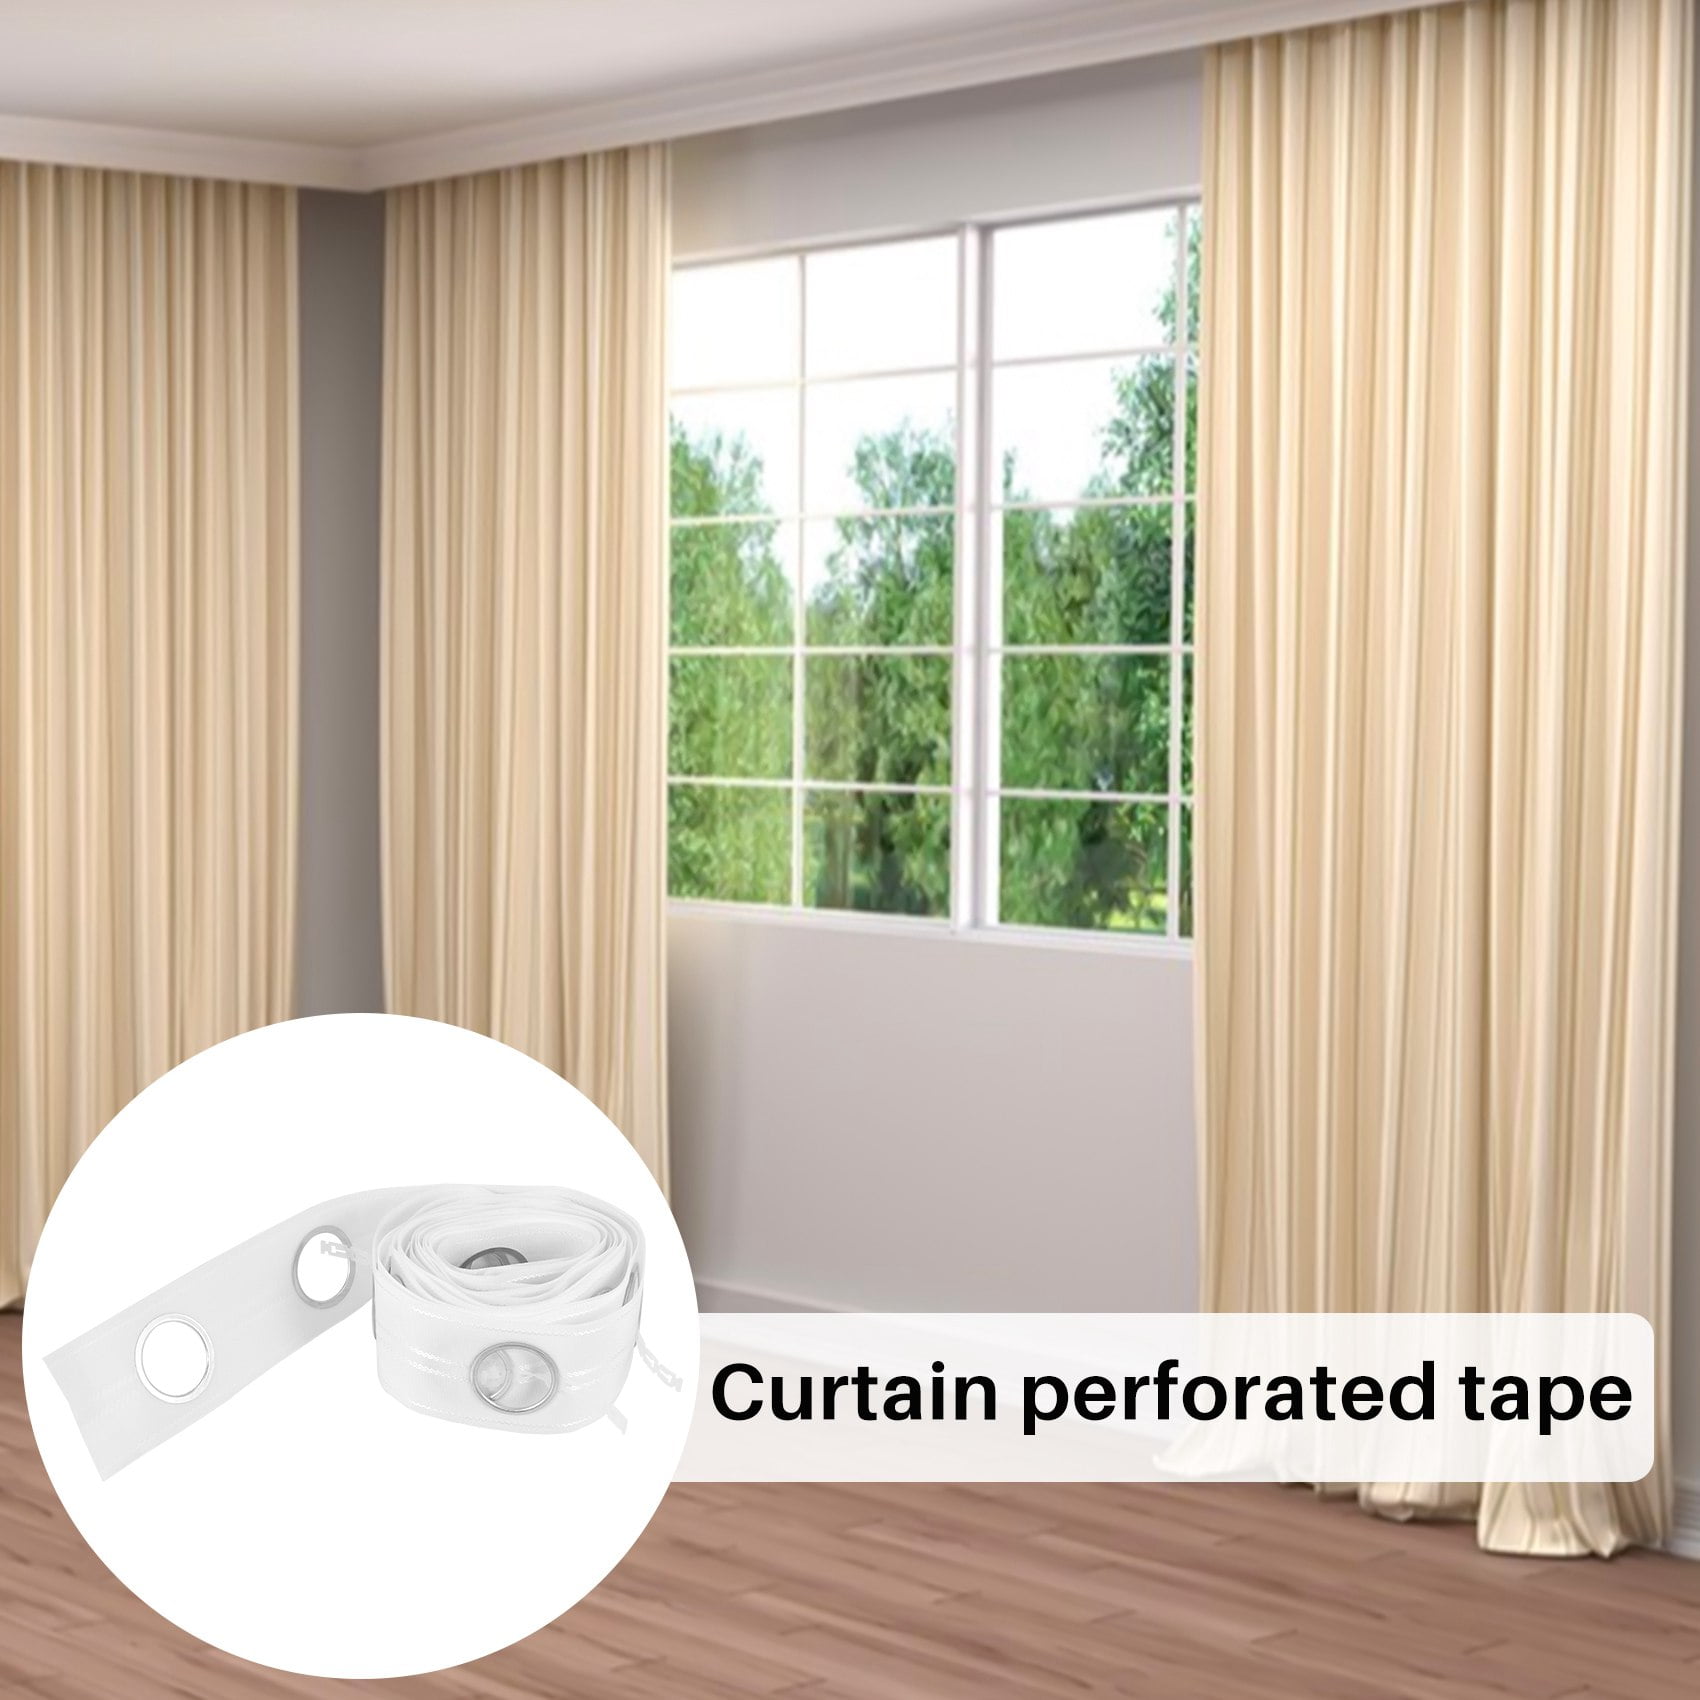 5M Eyelet Curtain Tape 40 s Accessories Sewing Silver Curtains Blinds New  P2Bh